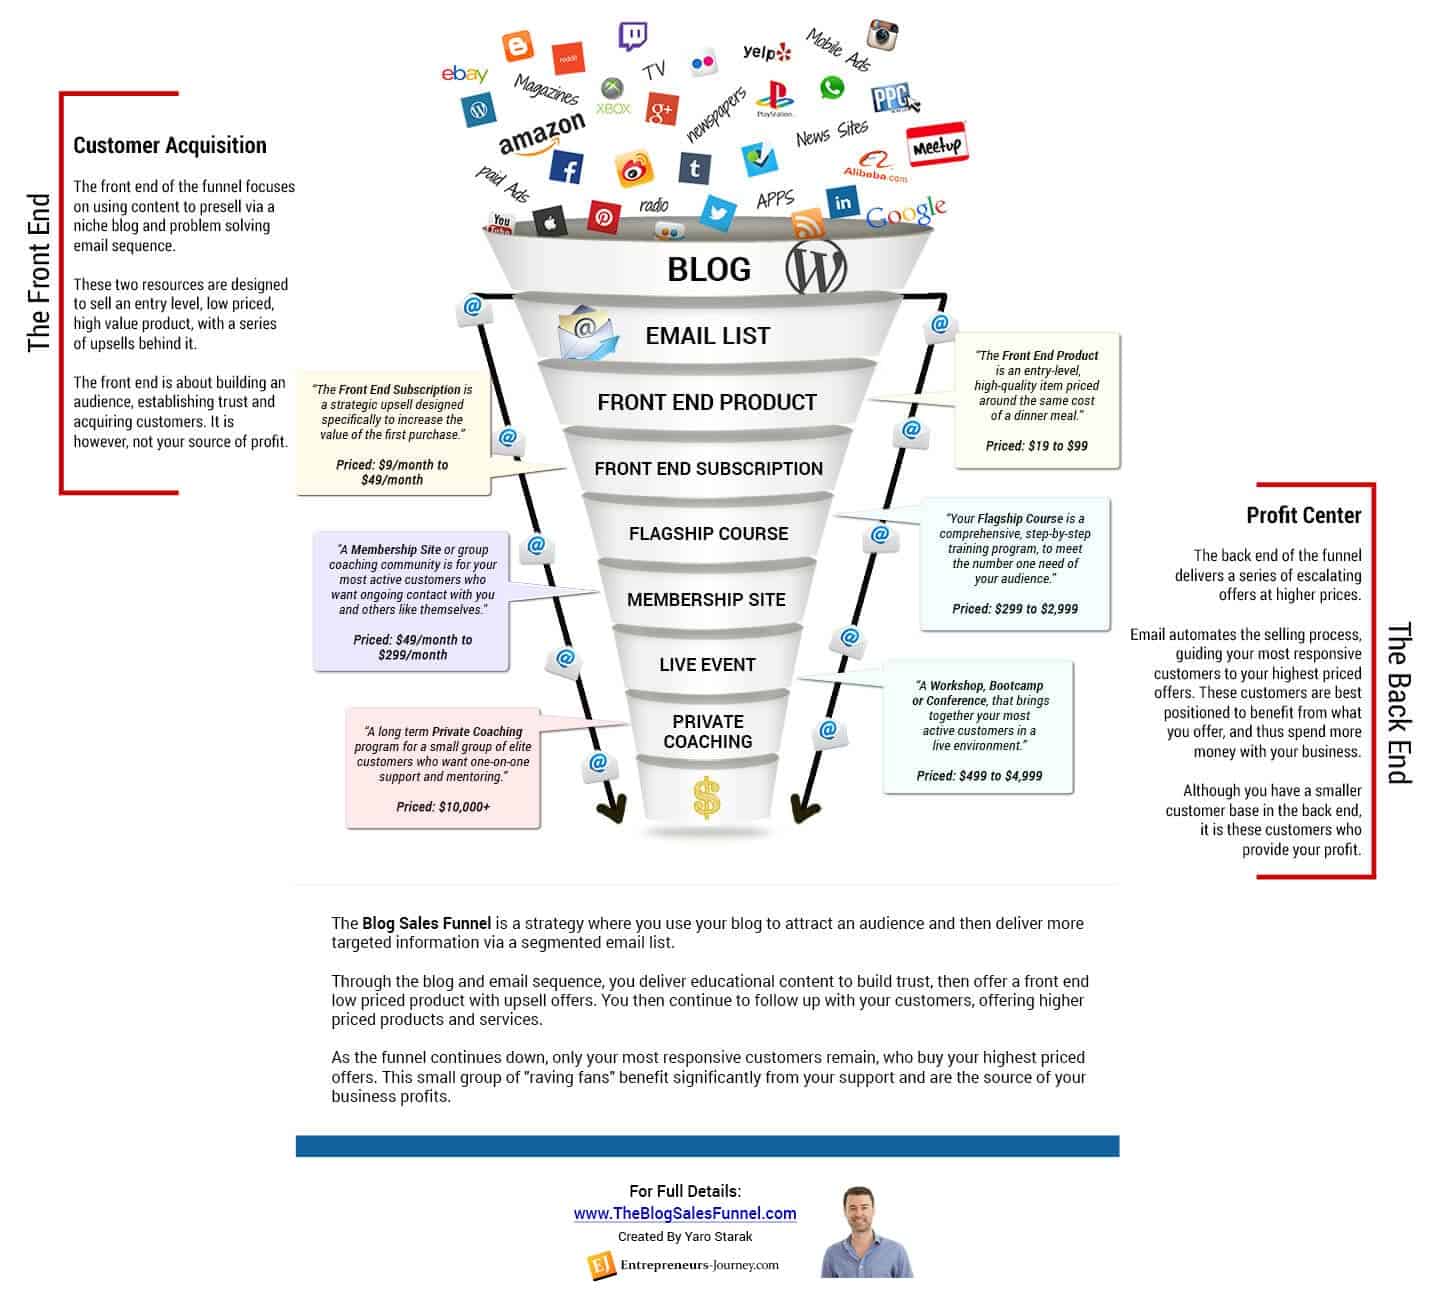 The Blog Sales Funnel Infographic